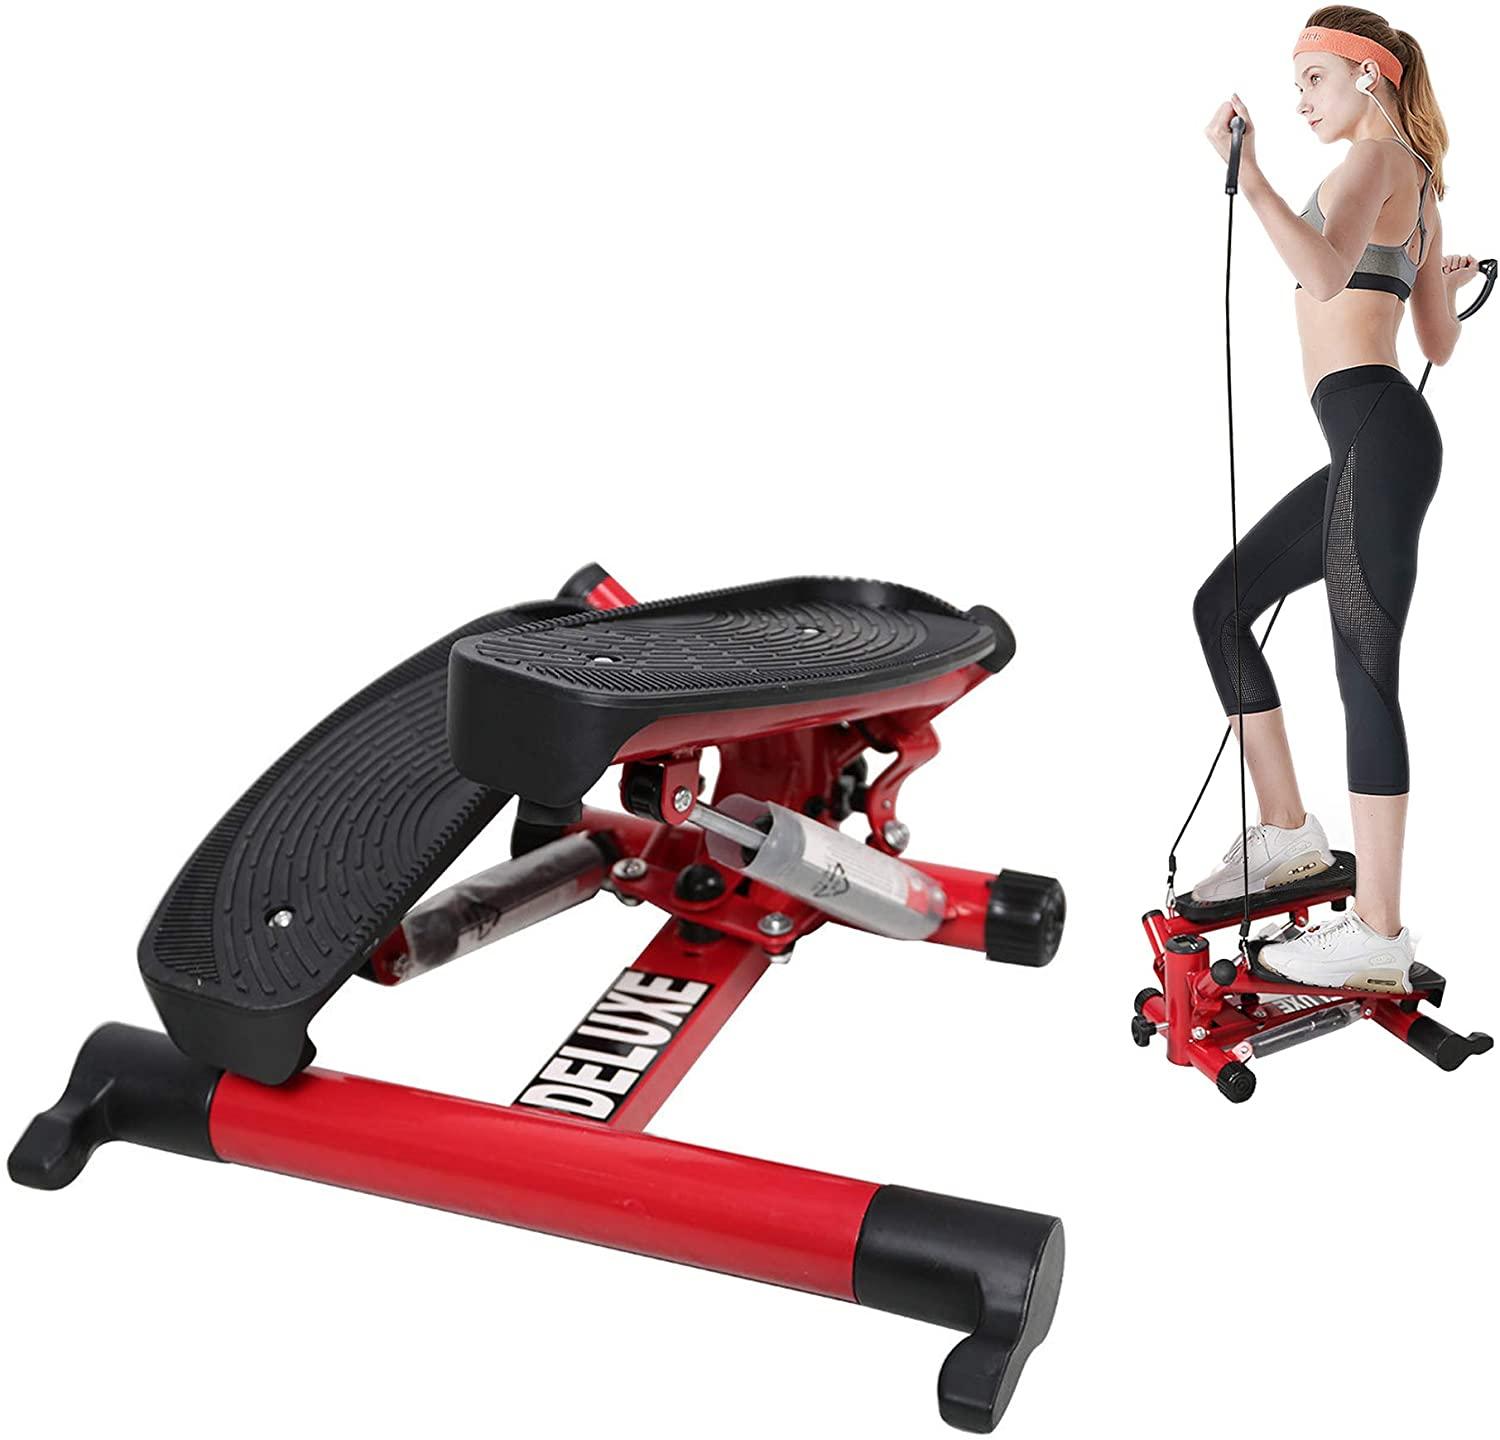 Folding Fitness Step Machine Air Walk Trainer Exercise Stepper Glider with LCD Display for Home, Office and Gym - Bosonshop